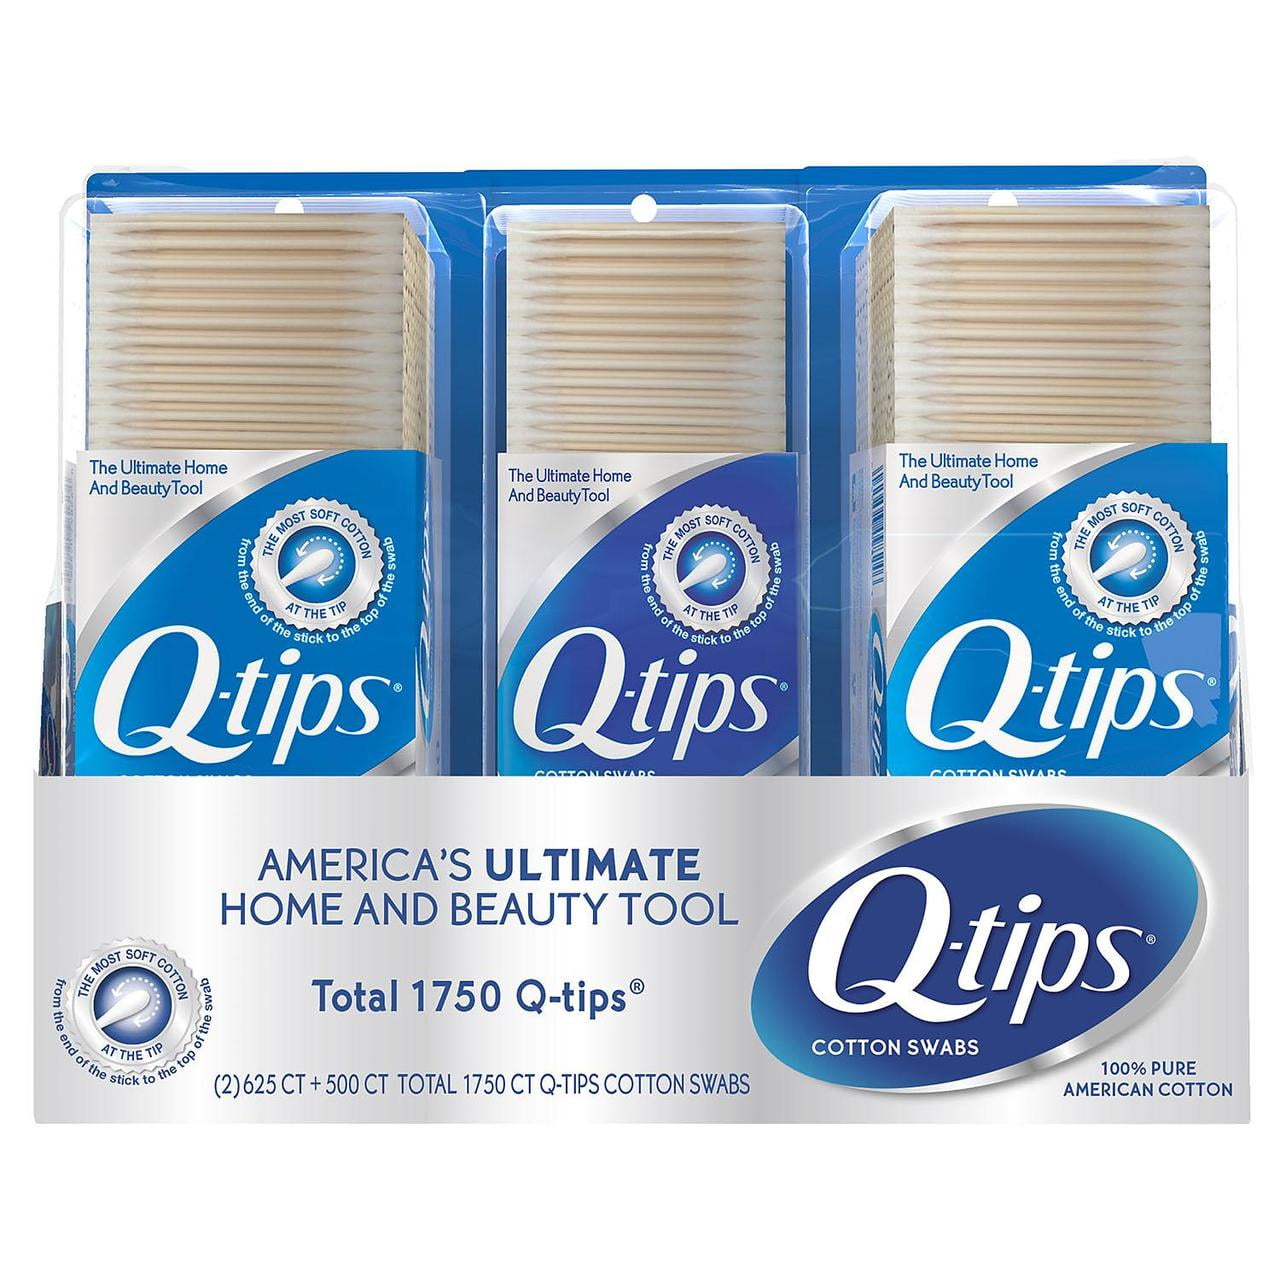 Q-tips 22127 30-Count Cotton Swabs Travel Pack - 36/Case